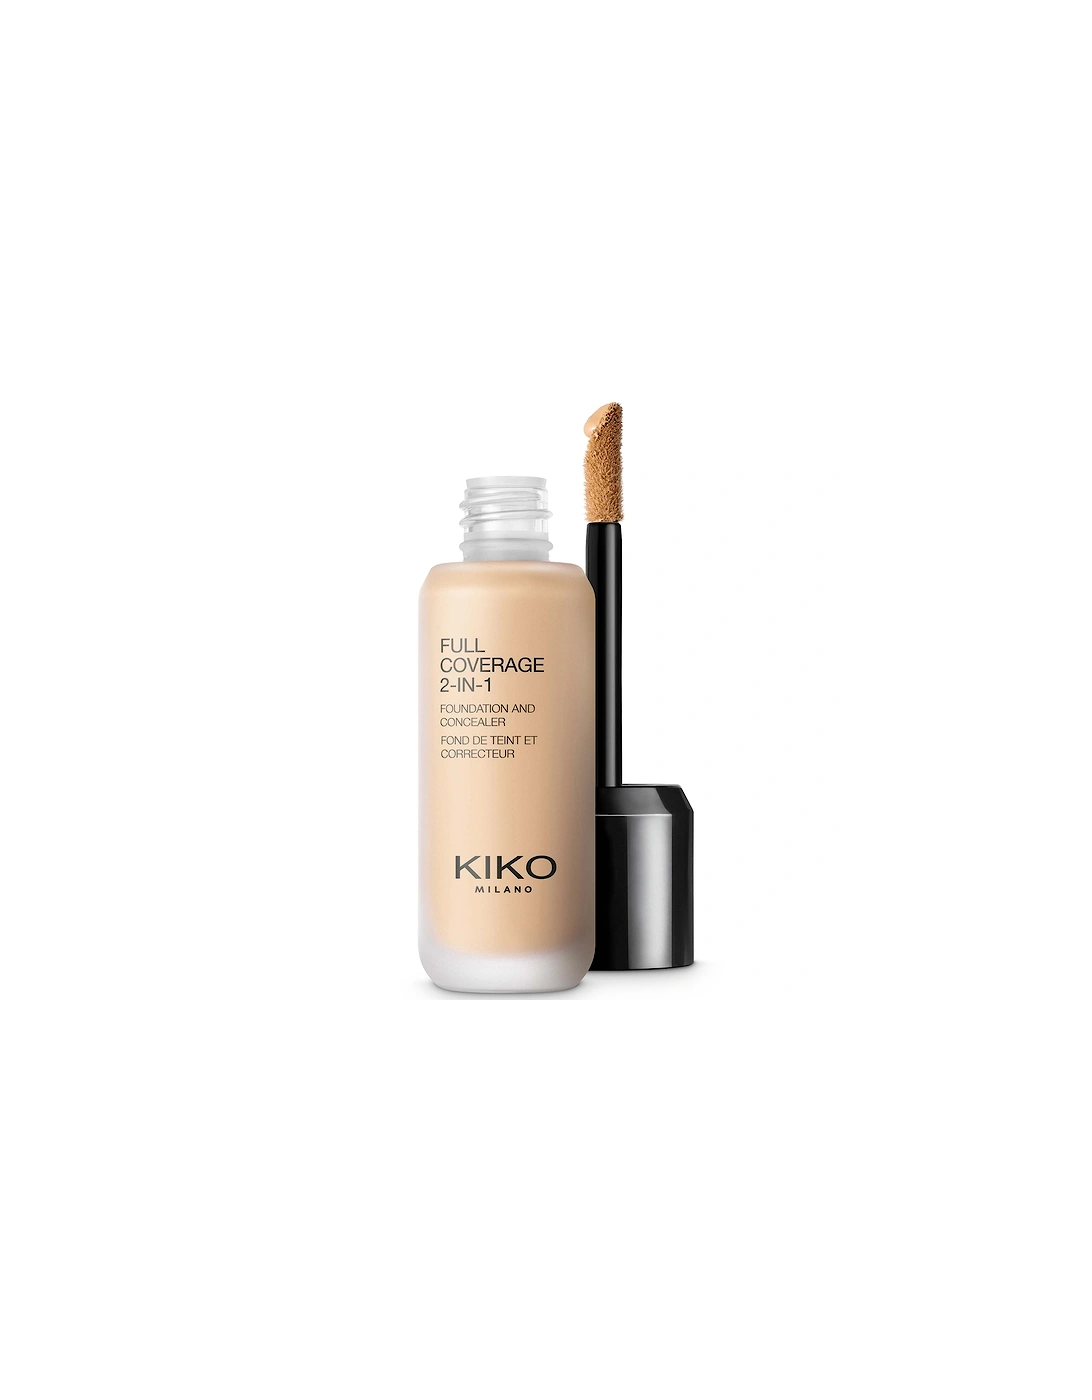 Full Coverage 2-in-1 Foundation and Concealer 25ml - 25 Neutral, 2 of 1